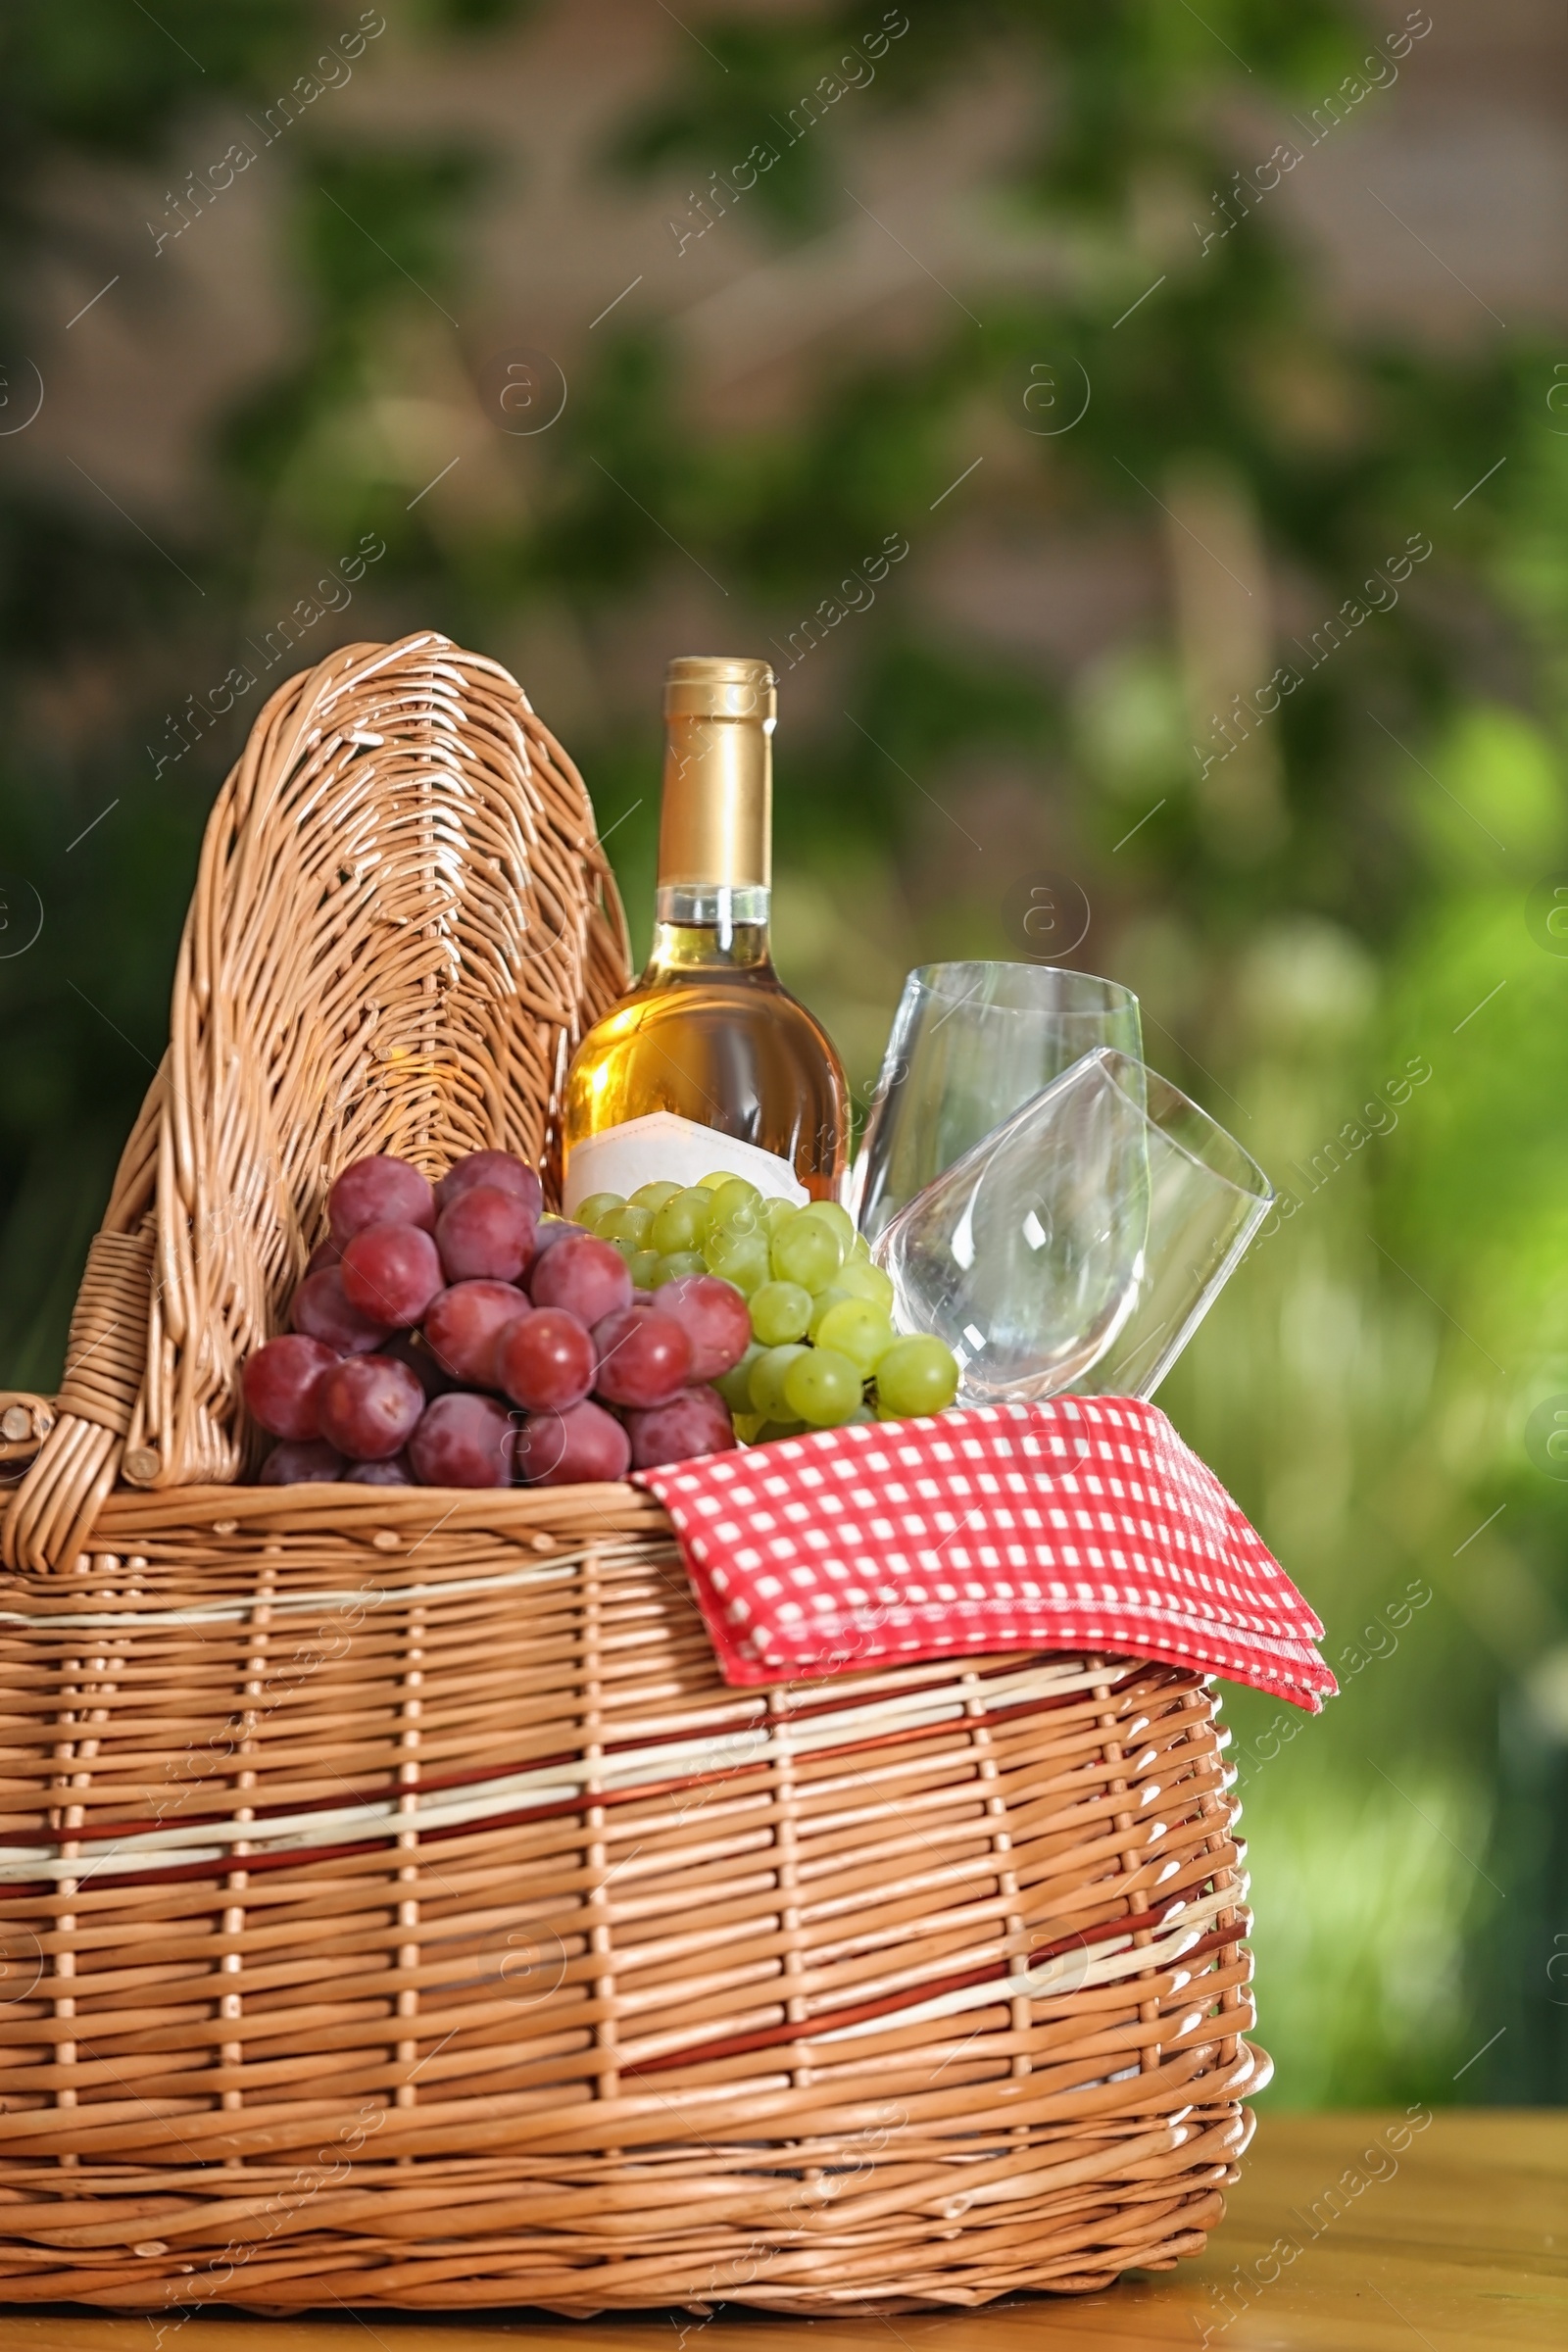 Photo of Picnic basket with wine, glasses and grapes on wooden table against blurred background, space for text